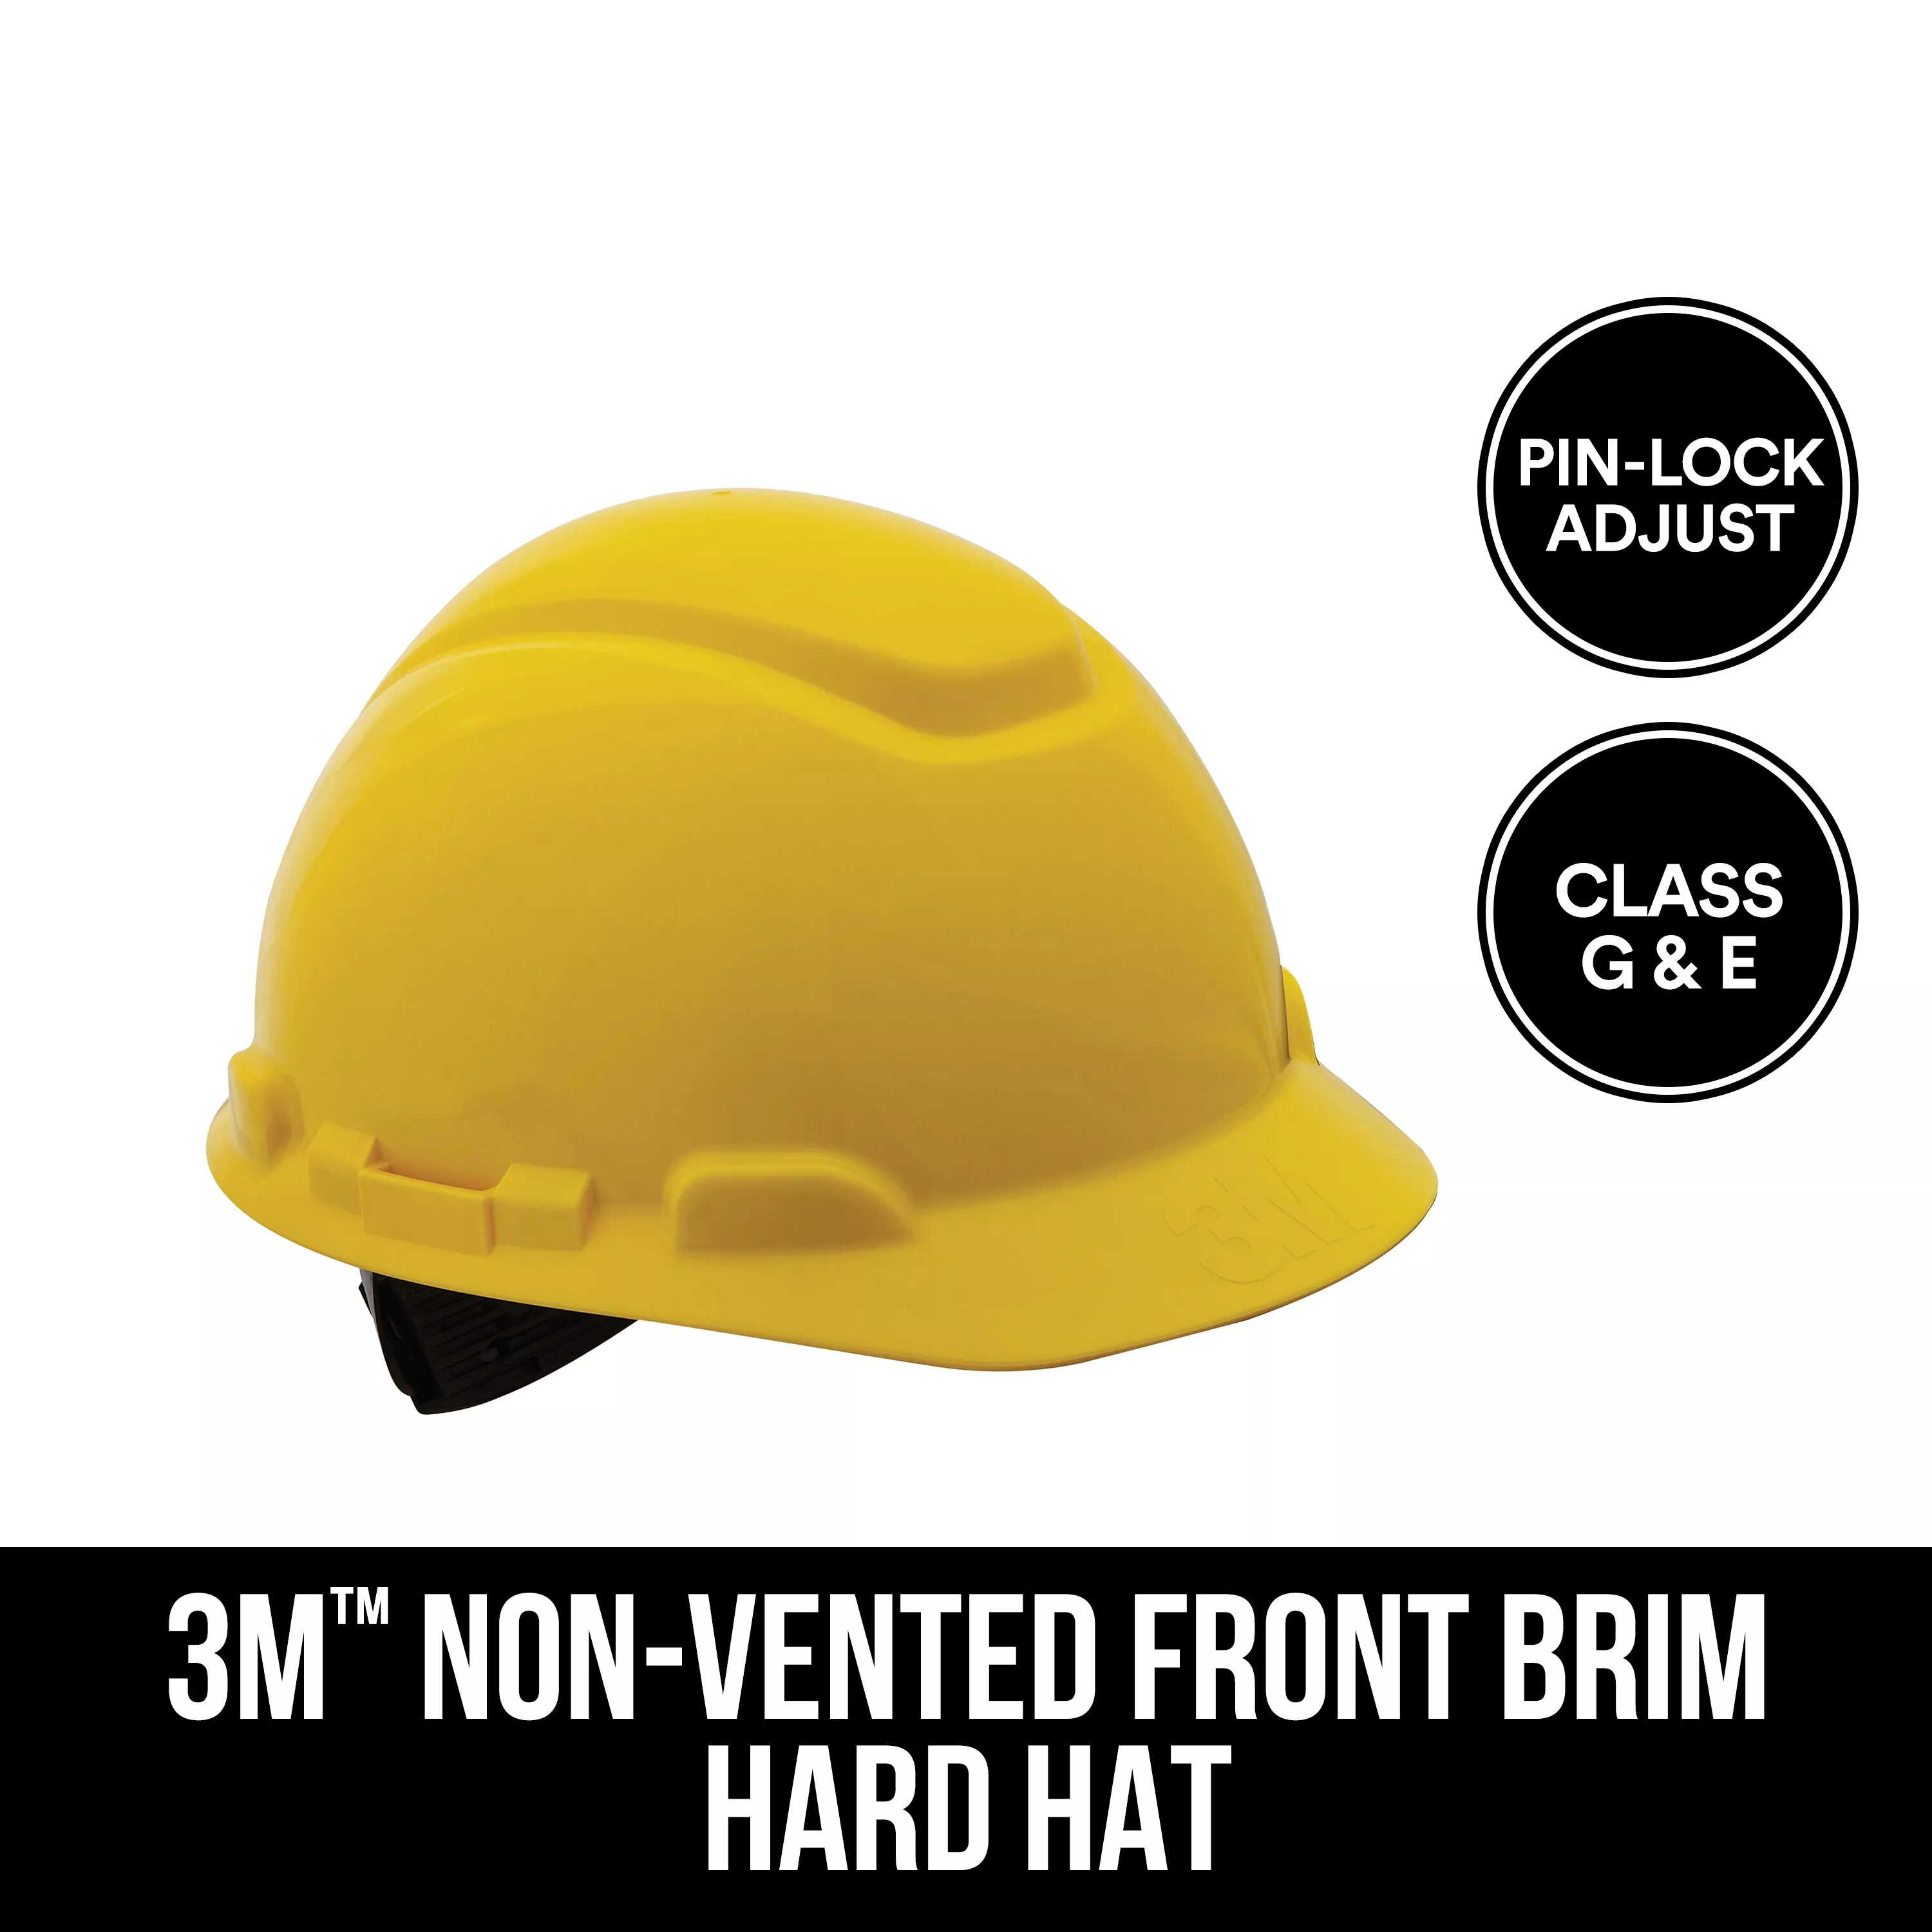 SKU 7100153544 | 3M™ Non-Vented Hard Hat with Pinlock Adjustment